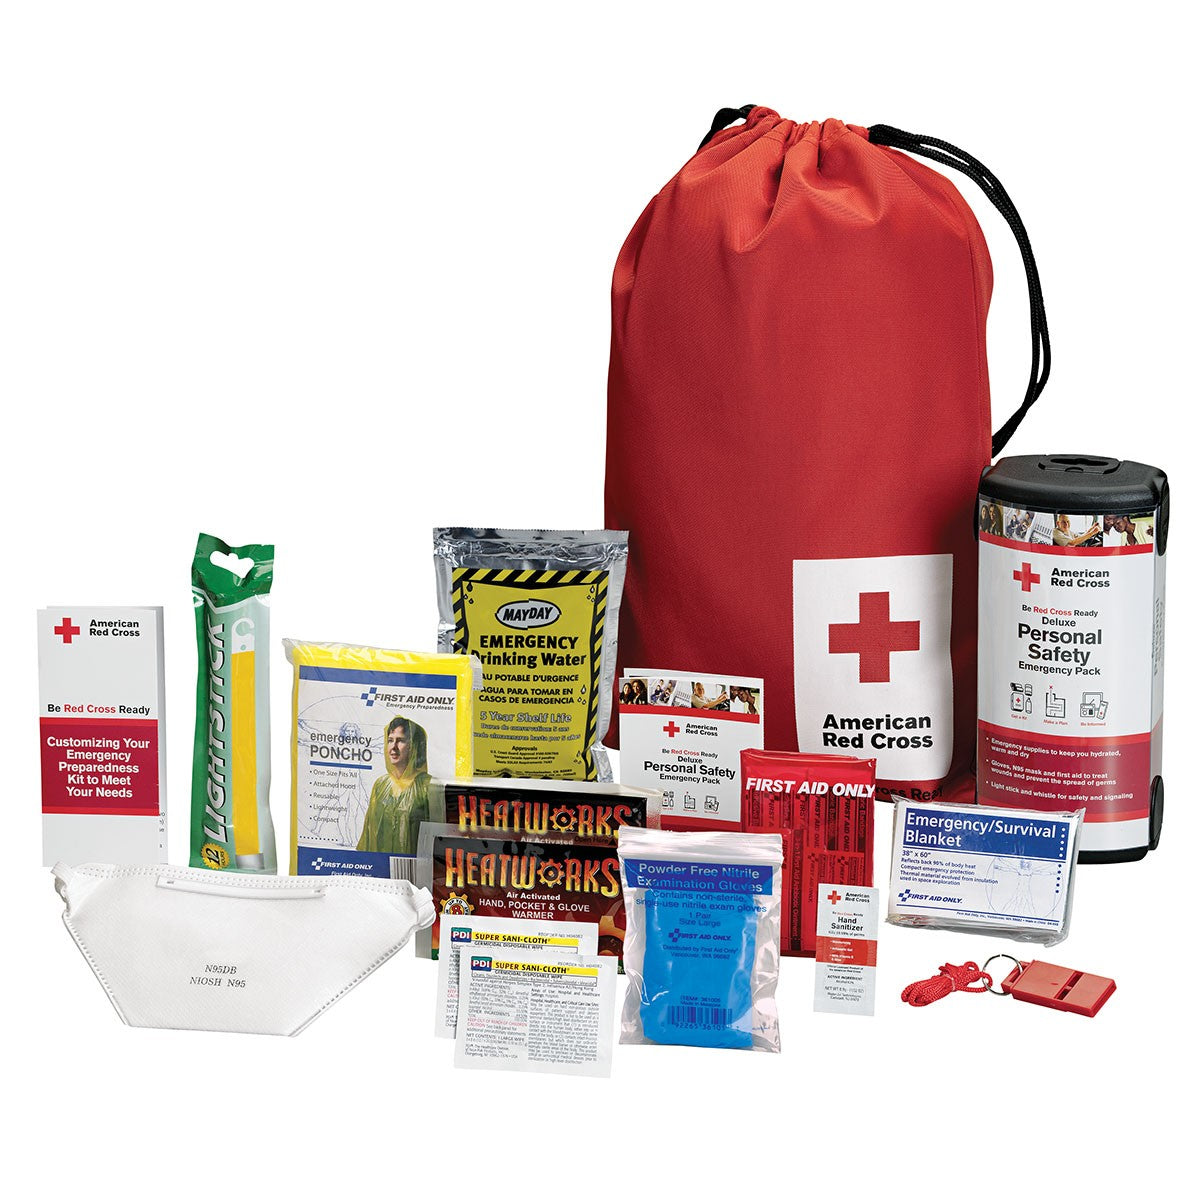 American Red Cross Deluxe Personal Safety Emergency Pack - BS-FAK-RC-622-1-FM